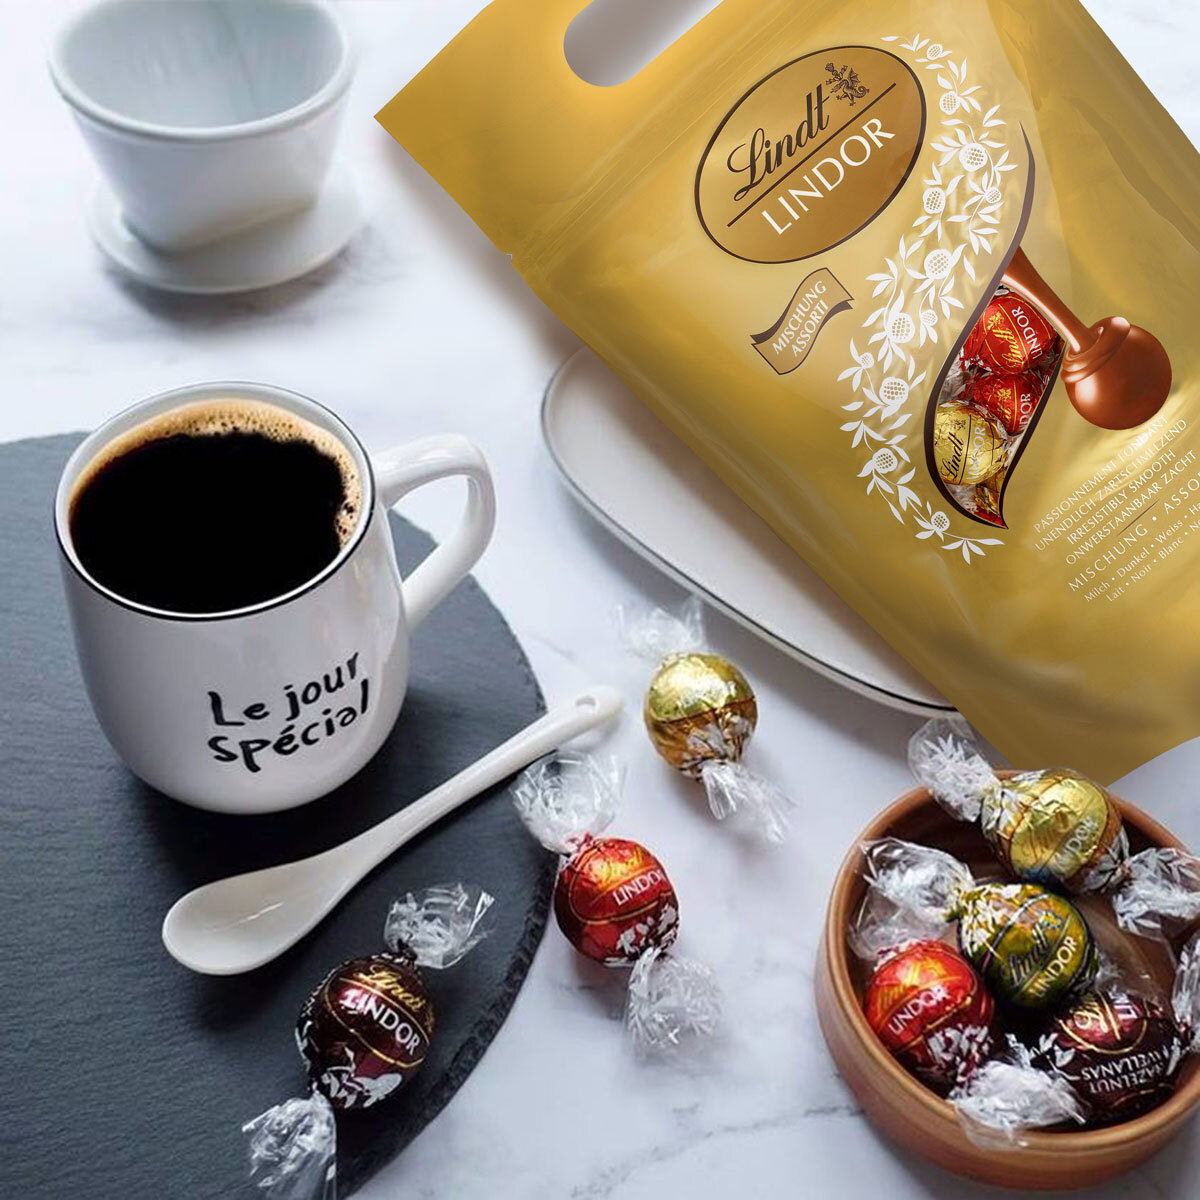 Lindt sees sales growth ahead as consumers crave sweet treats